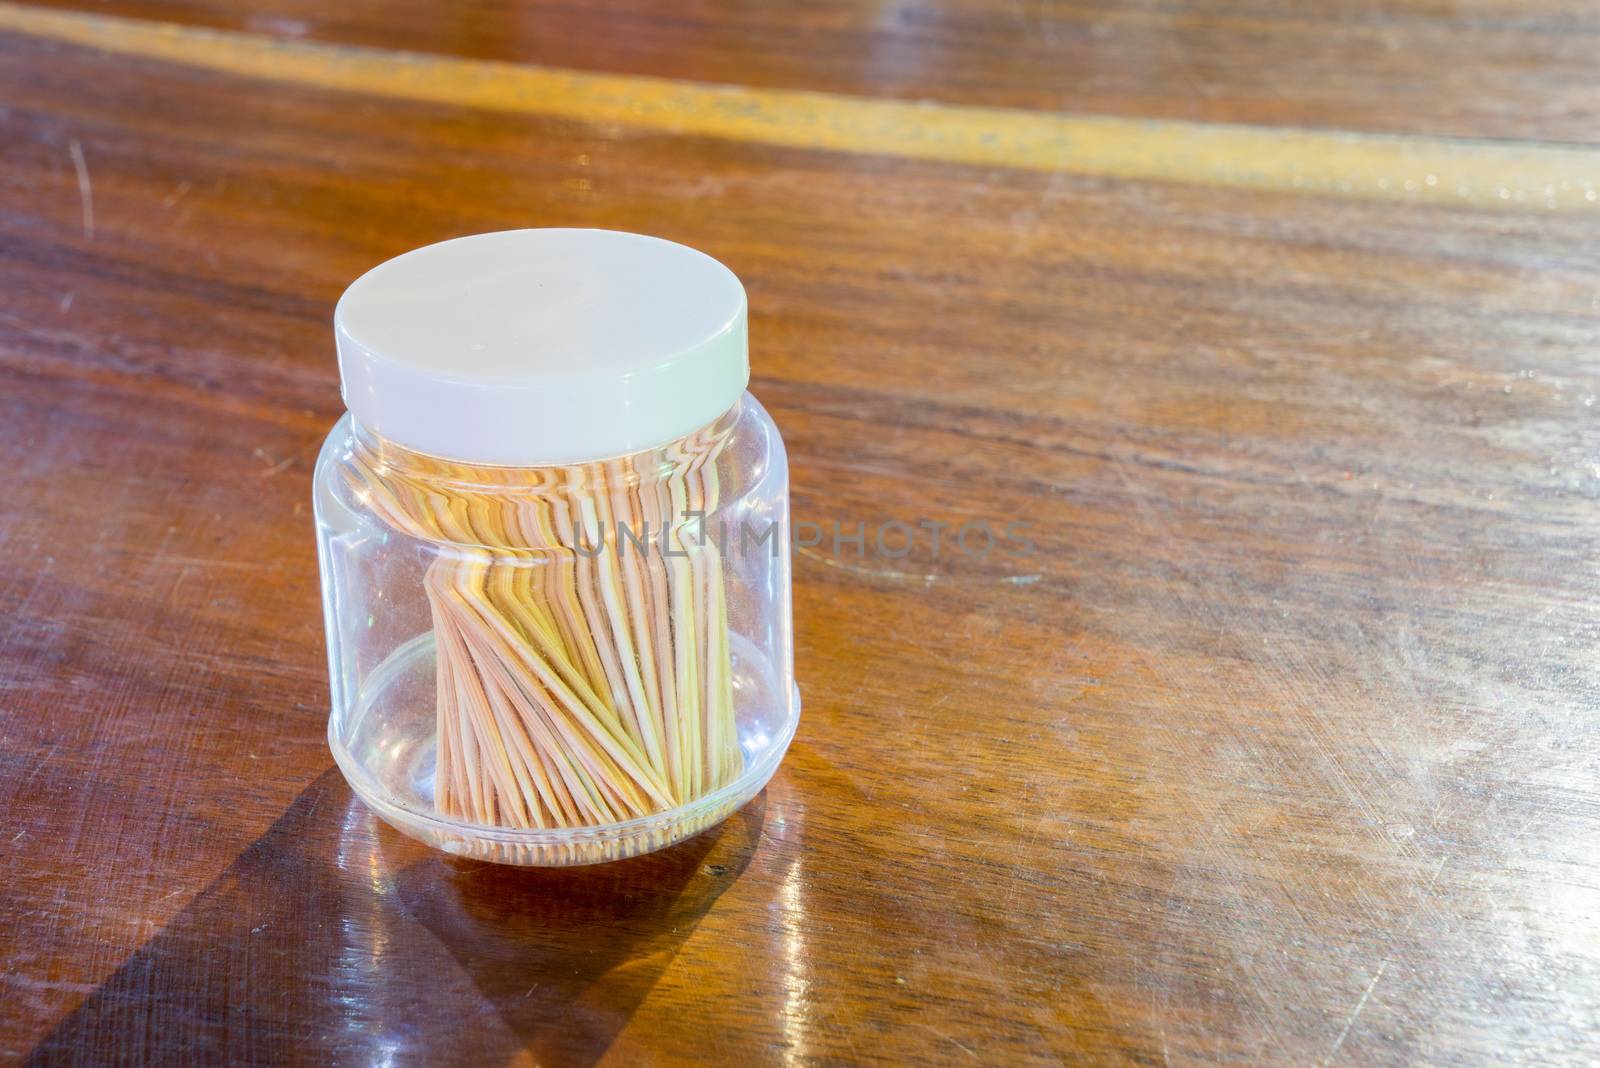 Toothpick in a bottle on a wooden table